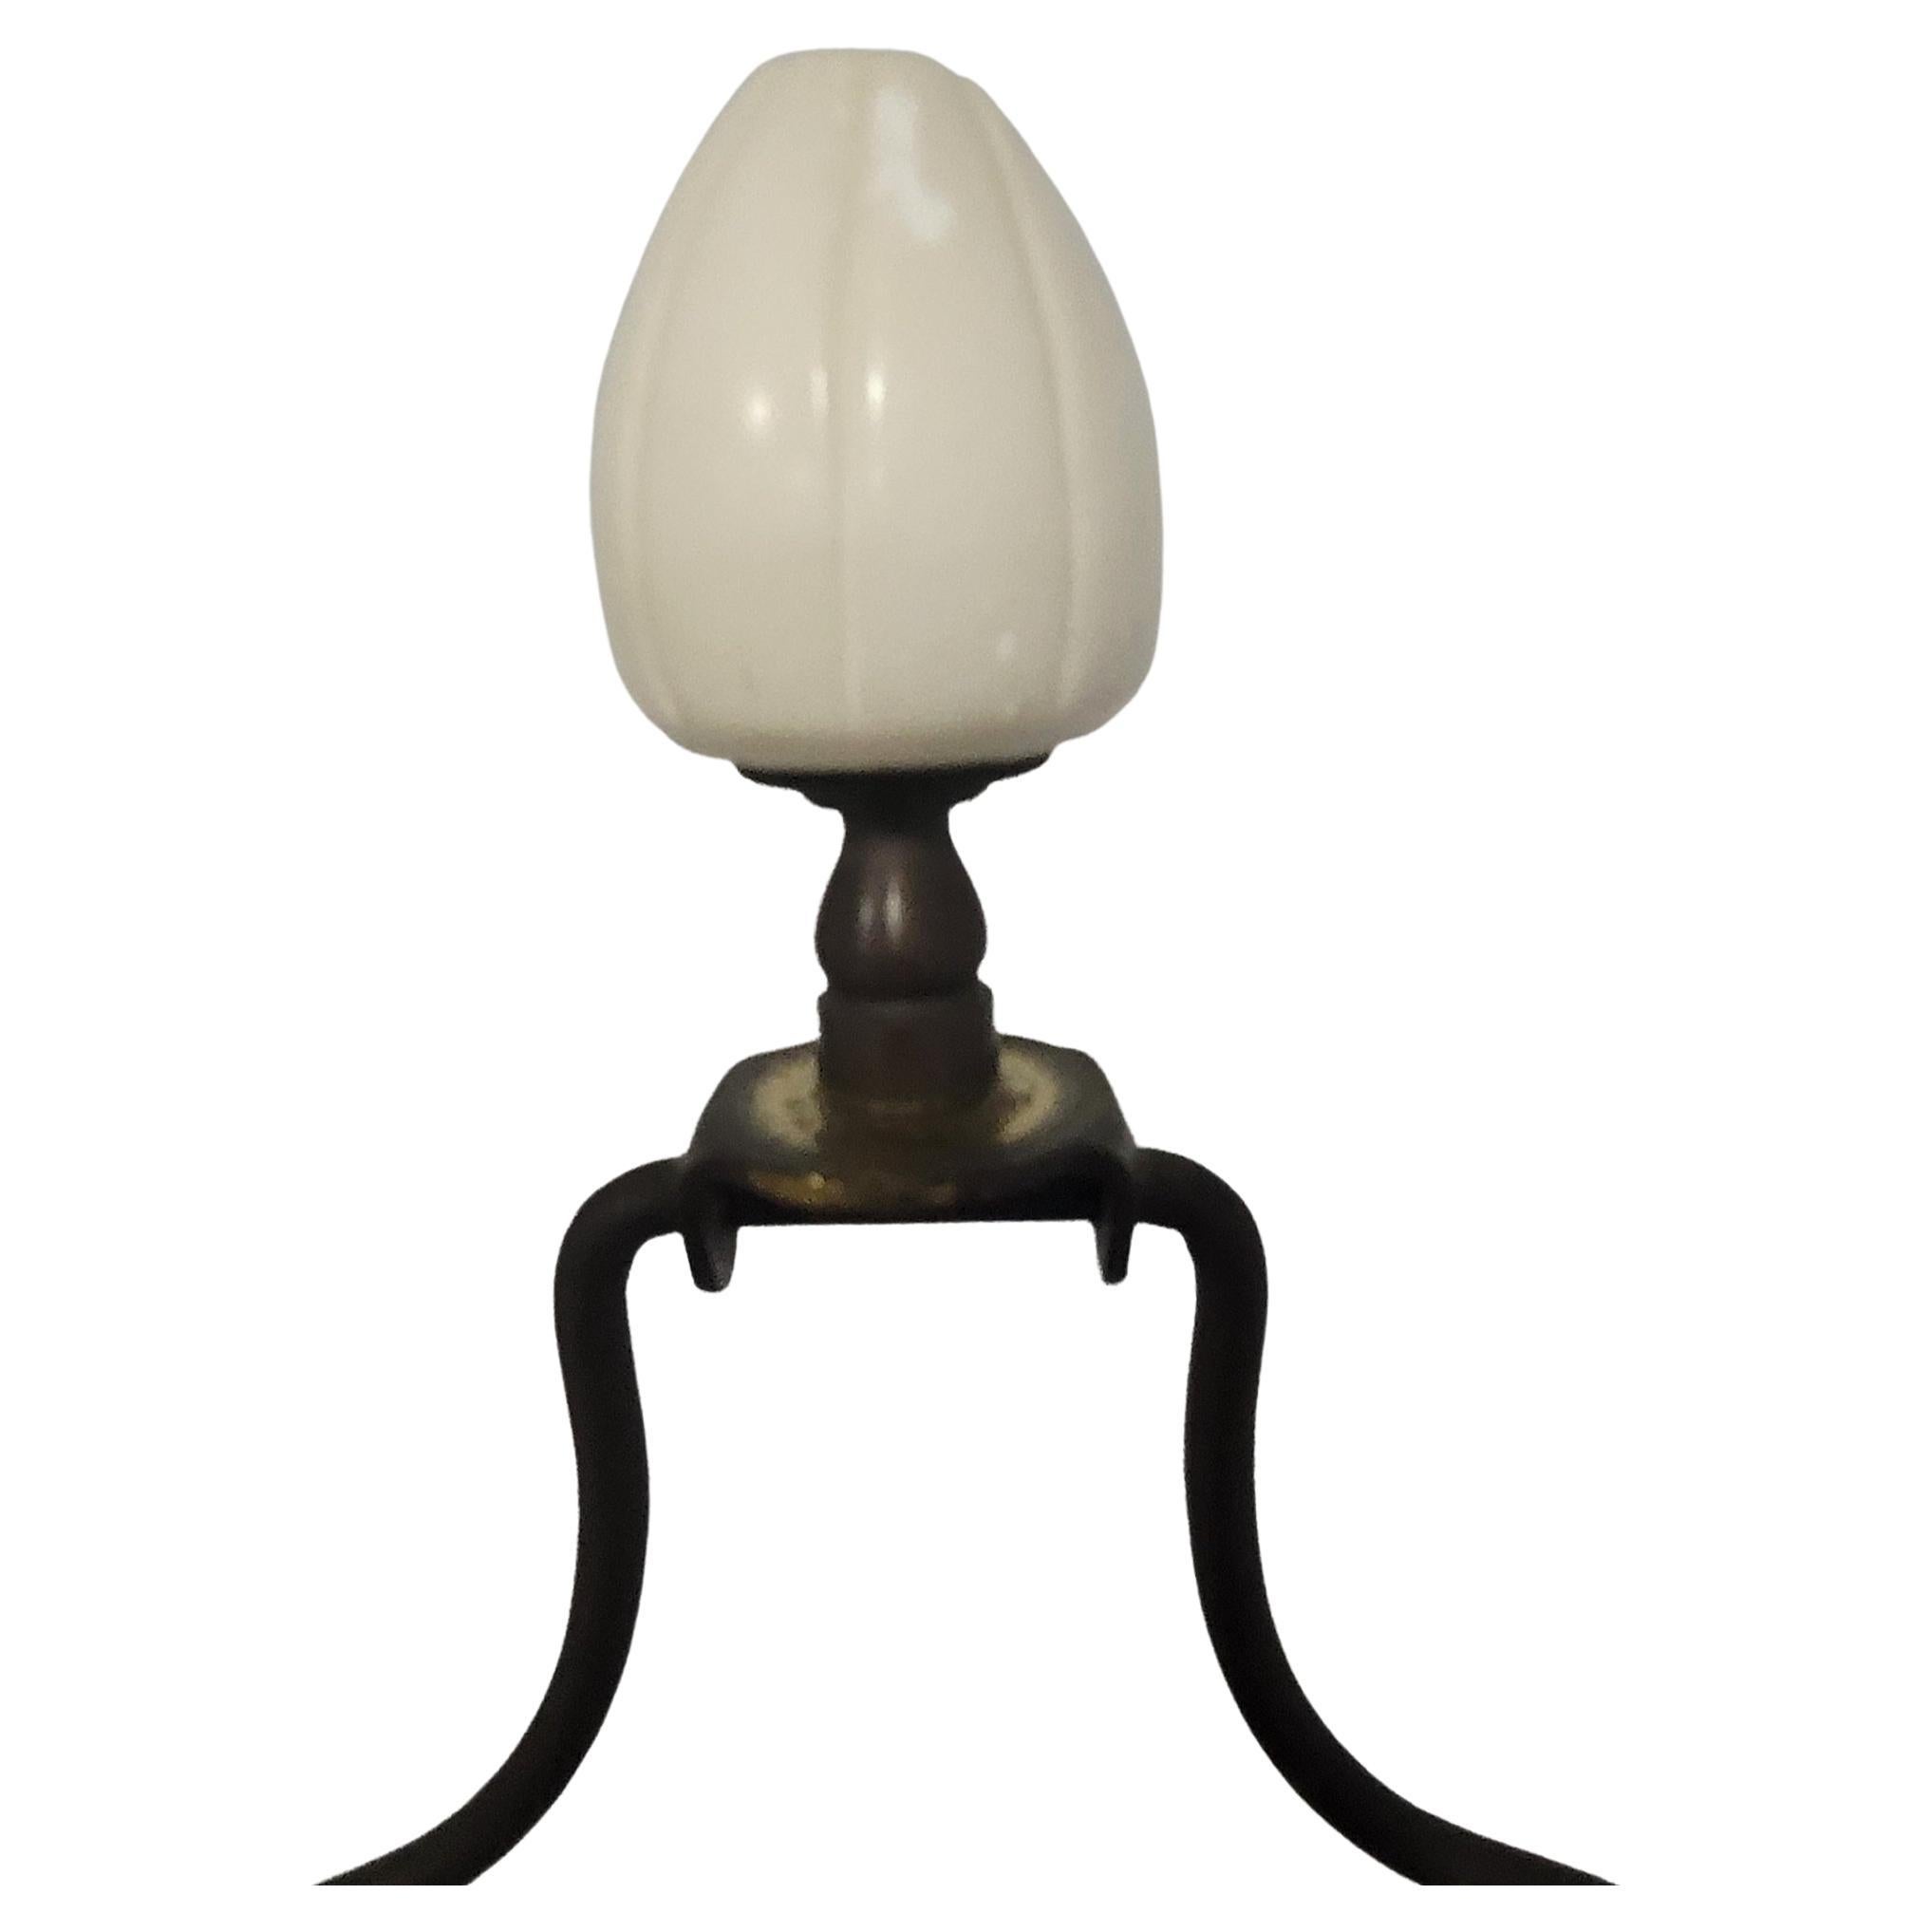 Italian Carrara Alabaster Marble and Brass Lamp In Good Condition For Sale In Germantown, MD